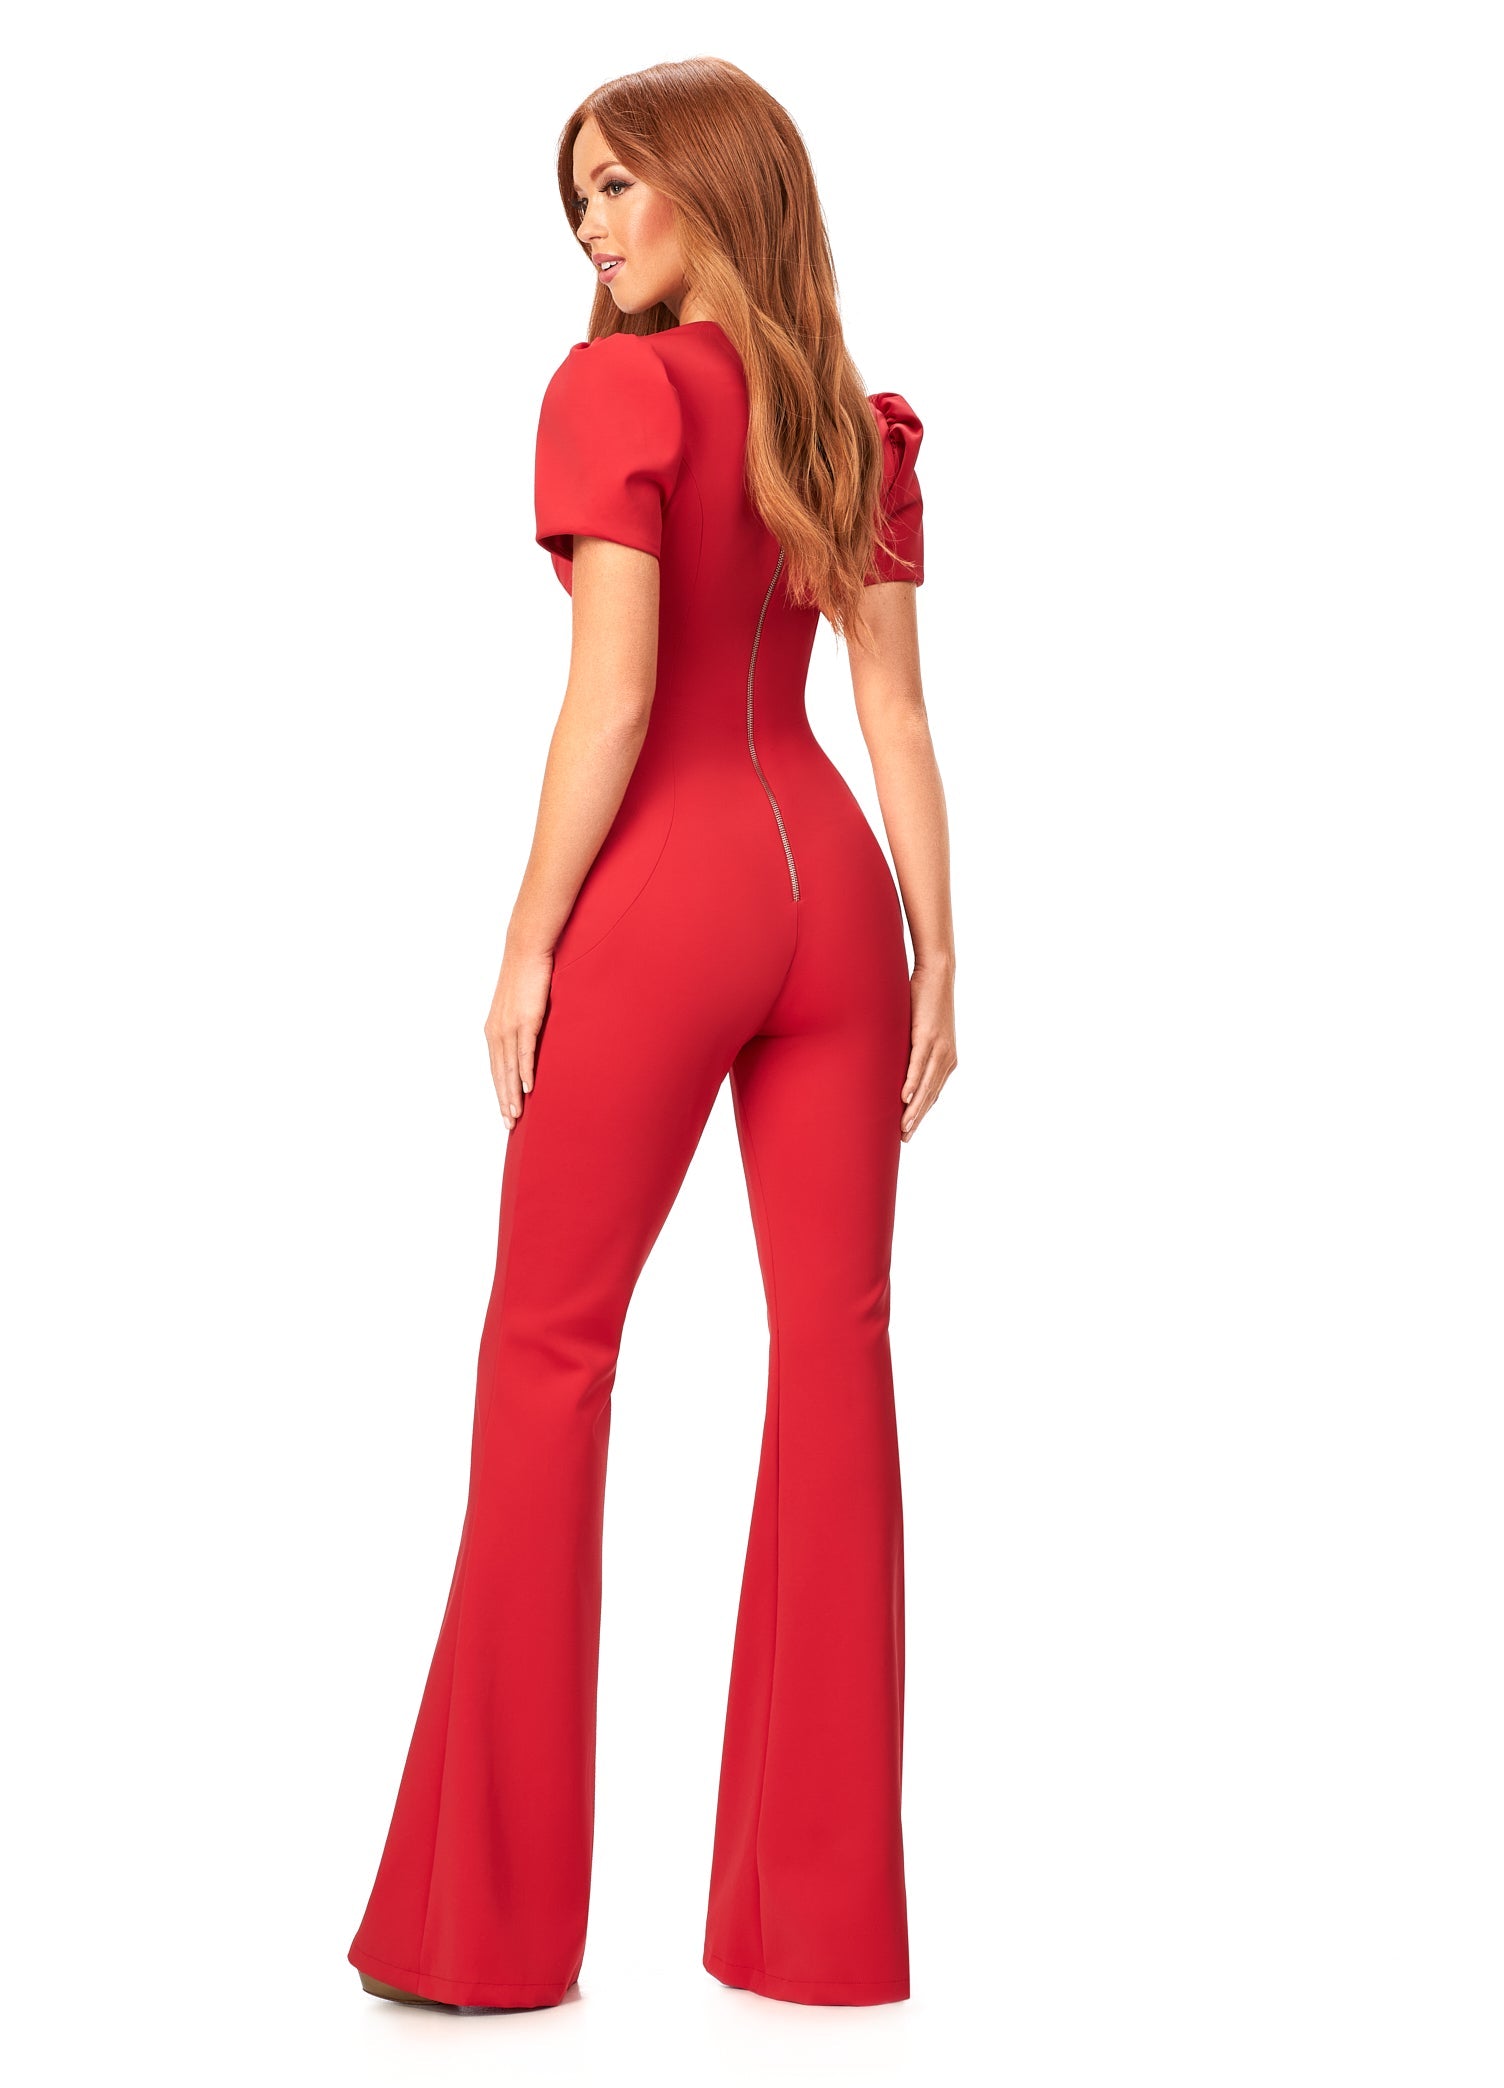 Ashley Lauren 11218 Long Puff Cap sleeve Fitted Scuba Pageant Jumpsuit Formal Wear The perfect jumpsuit is here! This scuba jumpsuit features a queen anne neckline and puff sleeves. Queen Anne Neckline Puff Sleeves Flare Pant Scuba Sizes: 00-24  Colors: Orchid, Sky, Red, Black